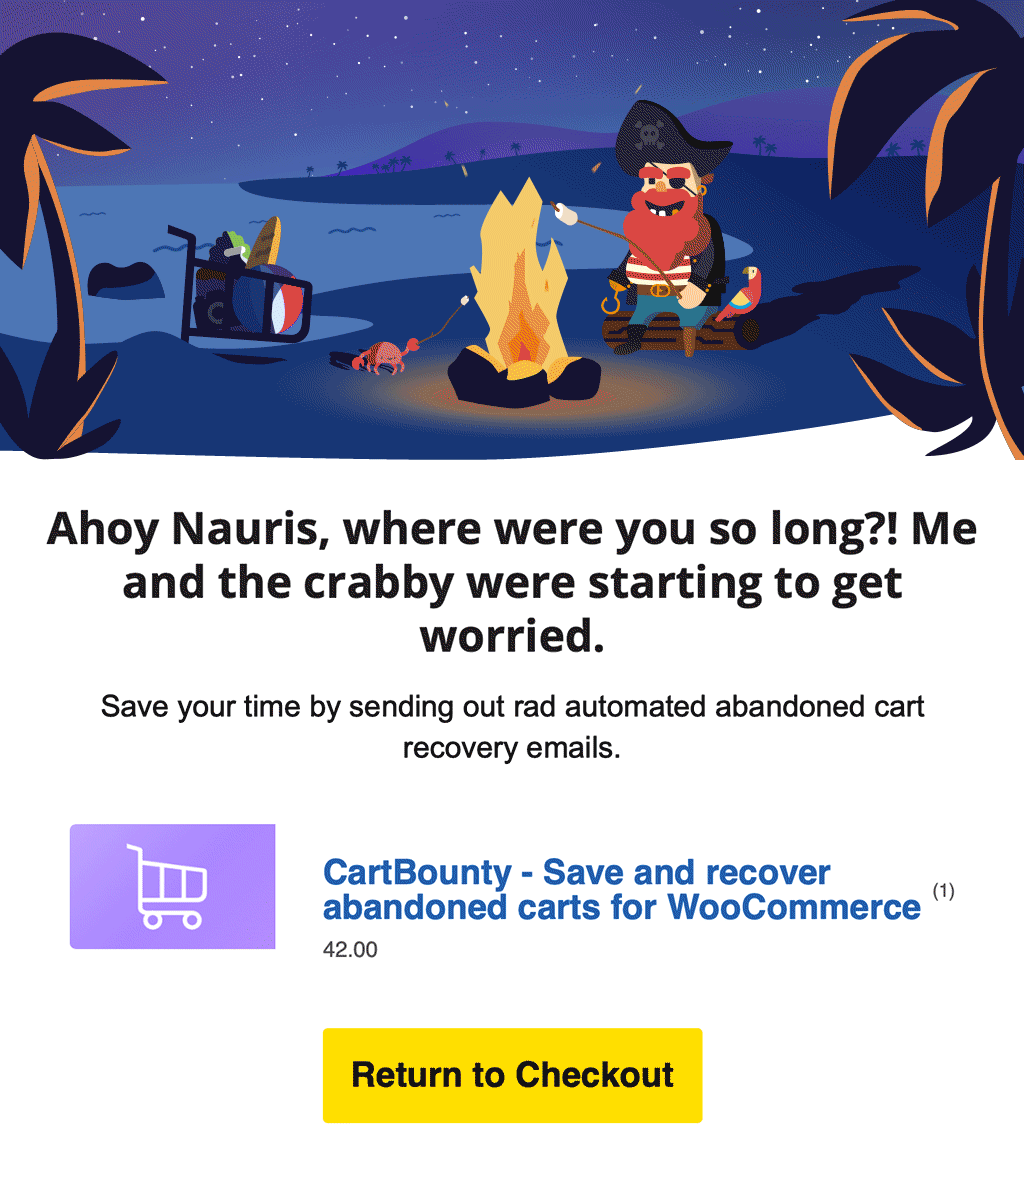 2nd abandoned cart email example from CartBounty featuring a pirate by the fireplace in the evening cooking supper